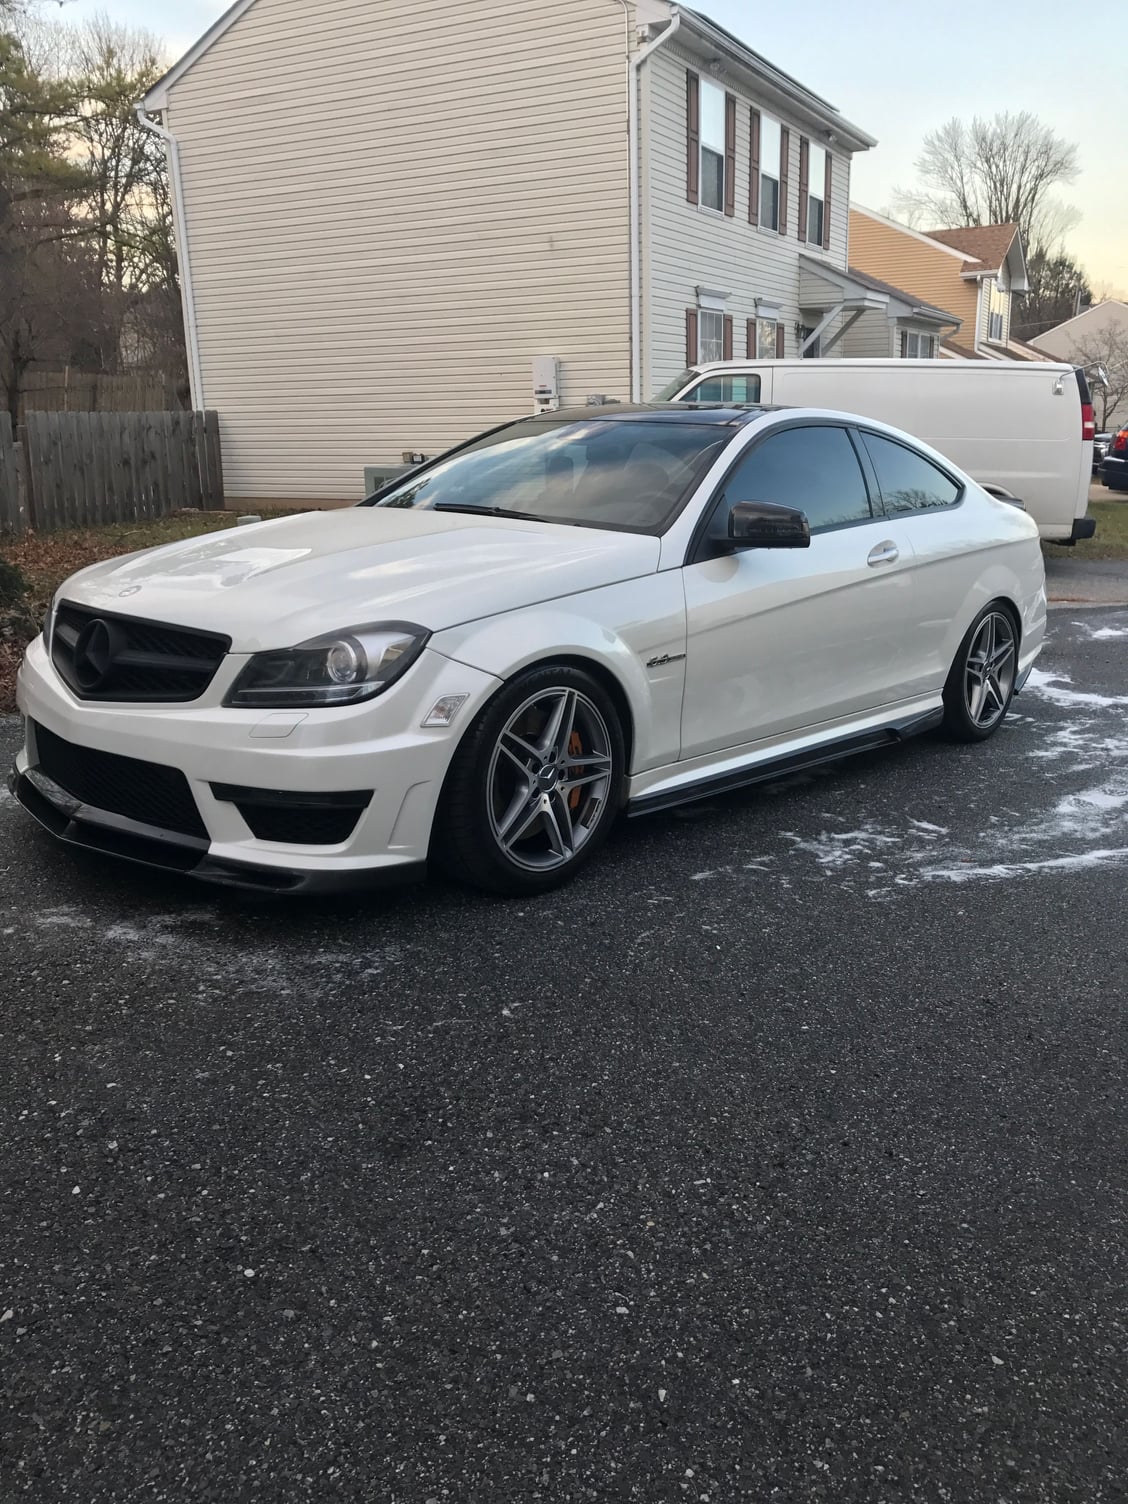 Wheels and Tires/Axles - 18" OEM AMG Wheels with Conti DWS06 and TPMS - Used - 2012 to 2015 Mercedes-Benz C63 AMG - Rockville, MD 20855, United States